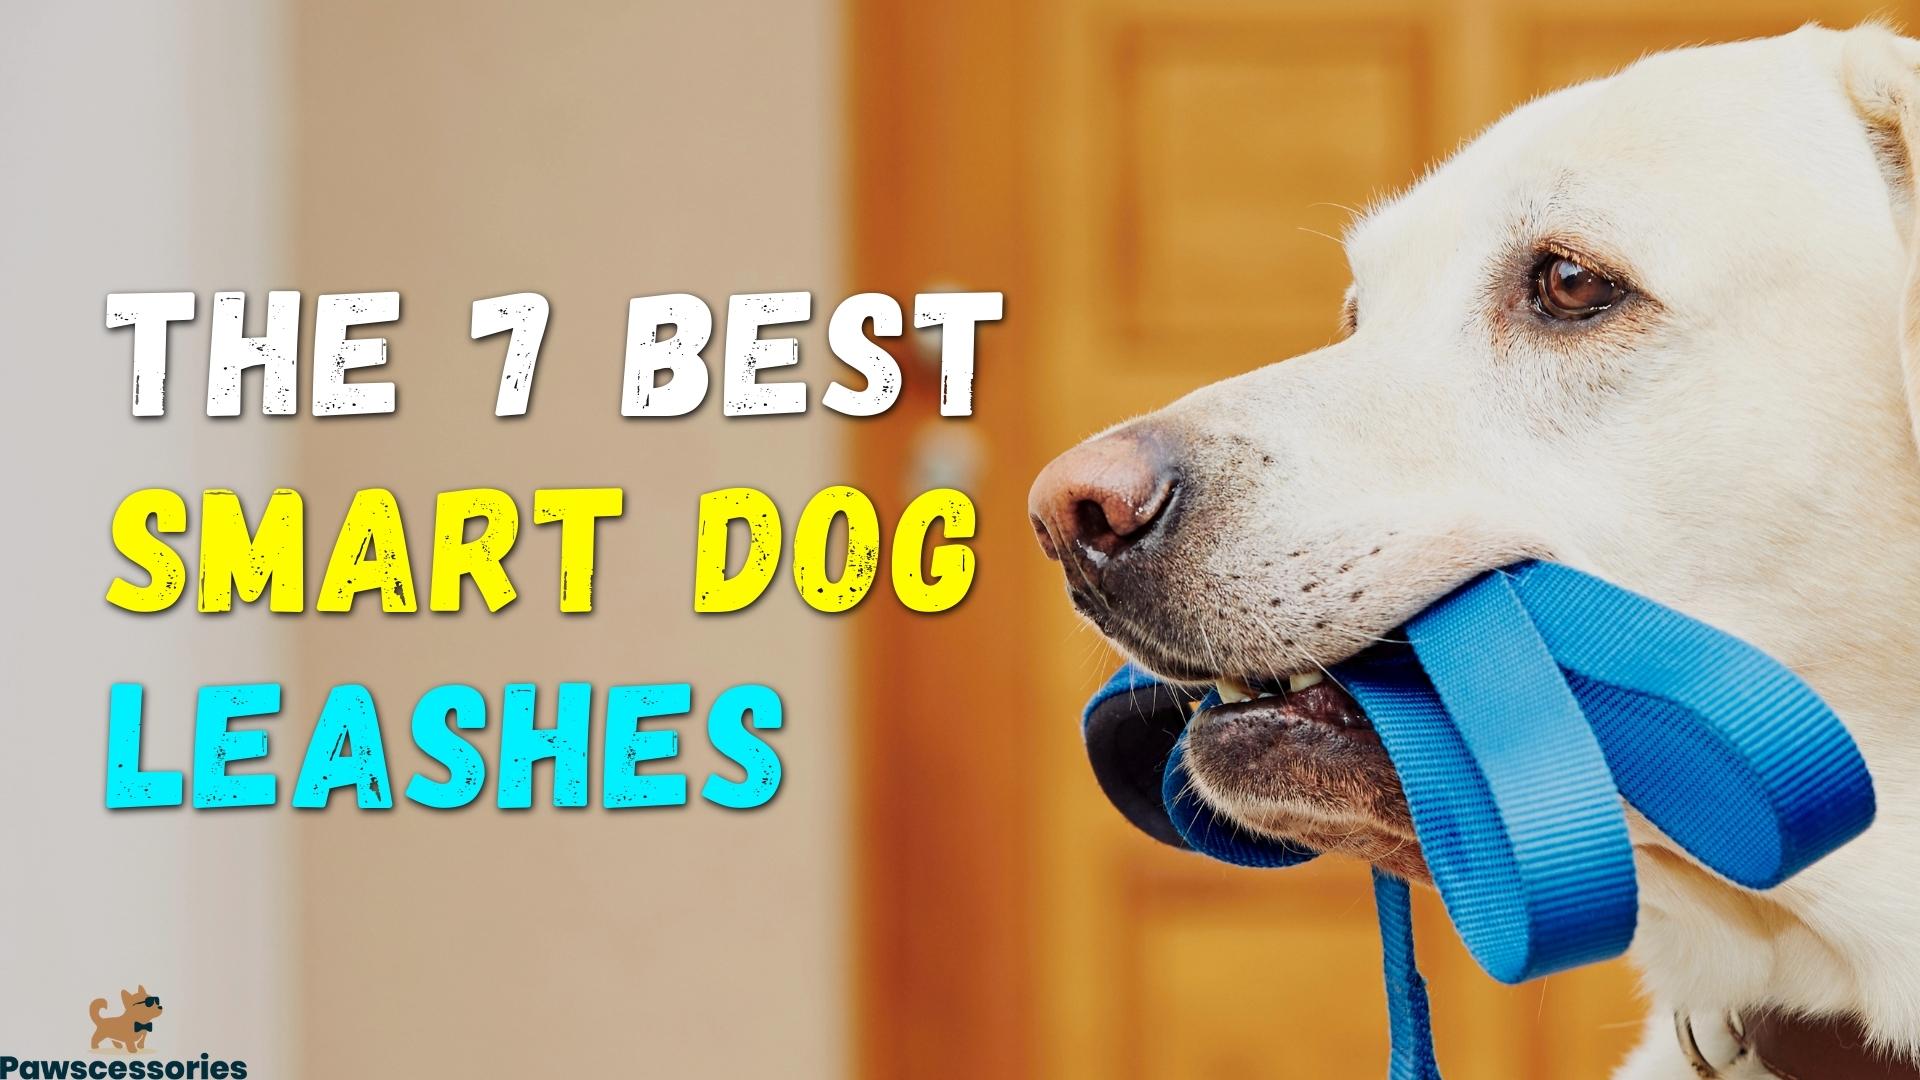 5 Best Smart Dog Leashes In 2022 (Top Picks & Reviews)